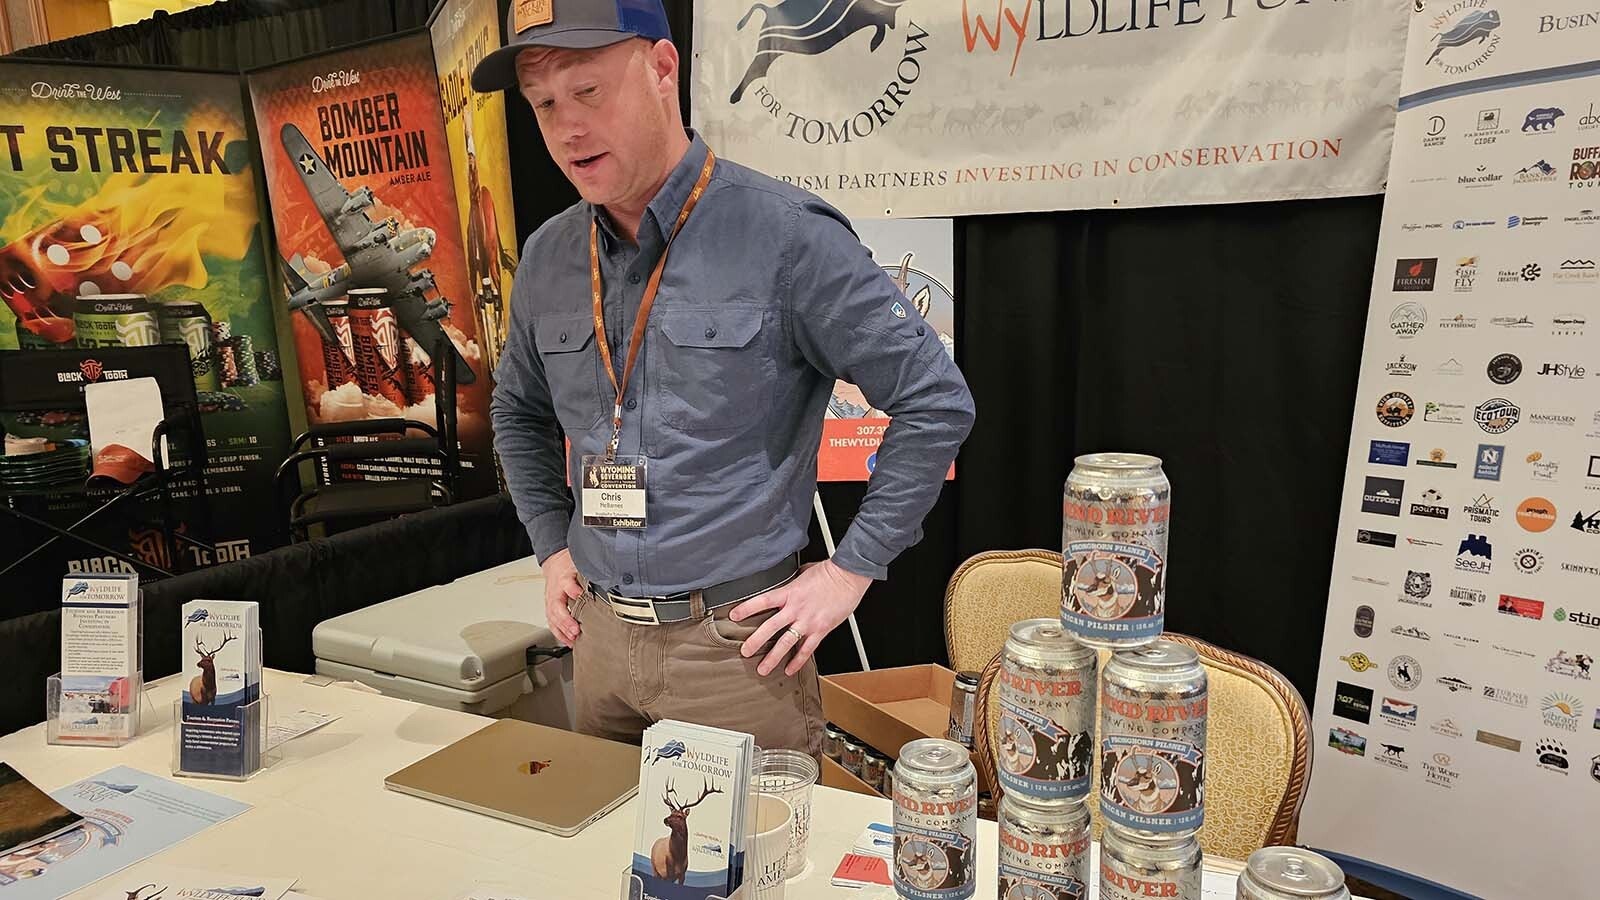 Chris McBarnes at Wyldlife For Tomorrow's booth at the Wyoming Governors Hospitality and Tourism Conference.